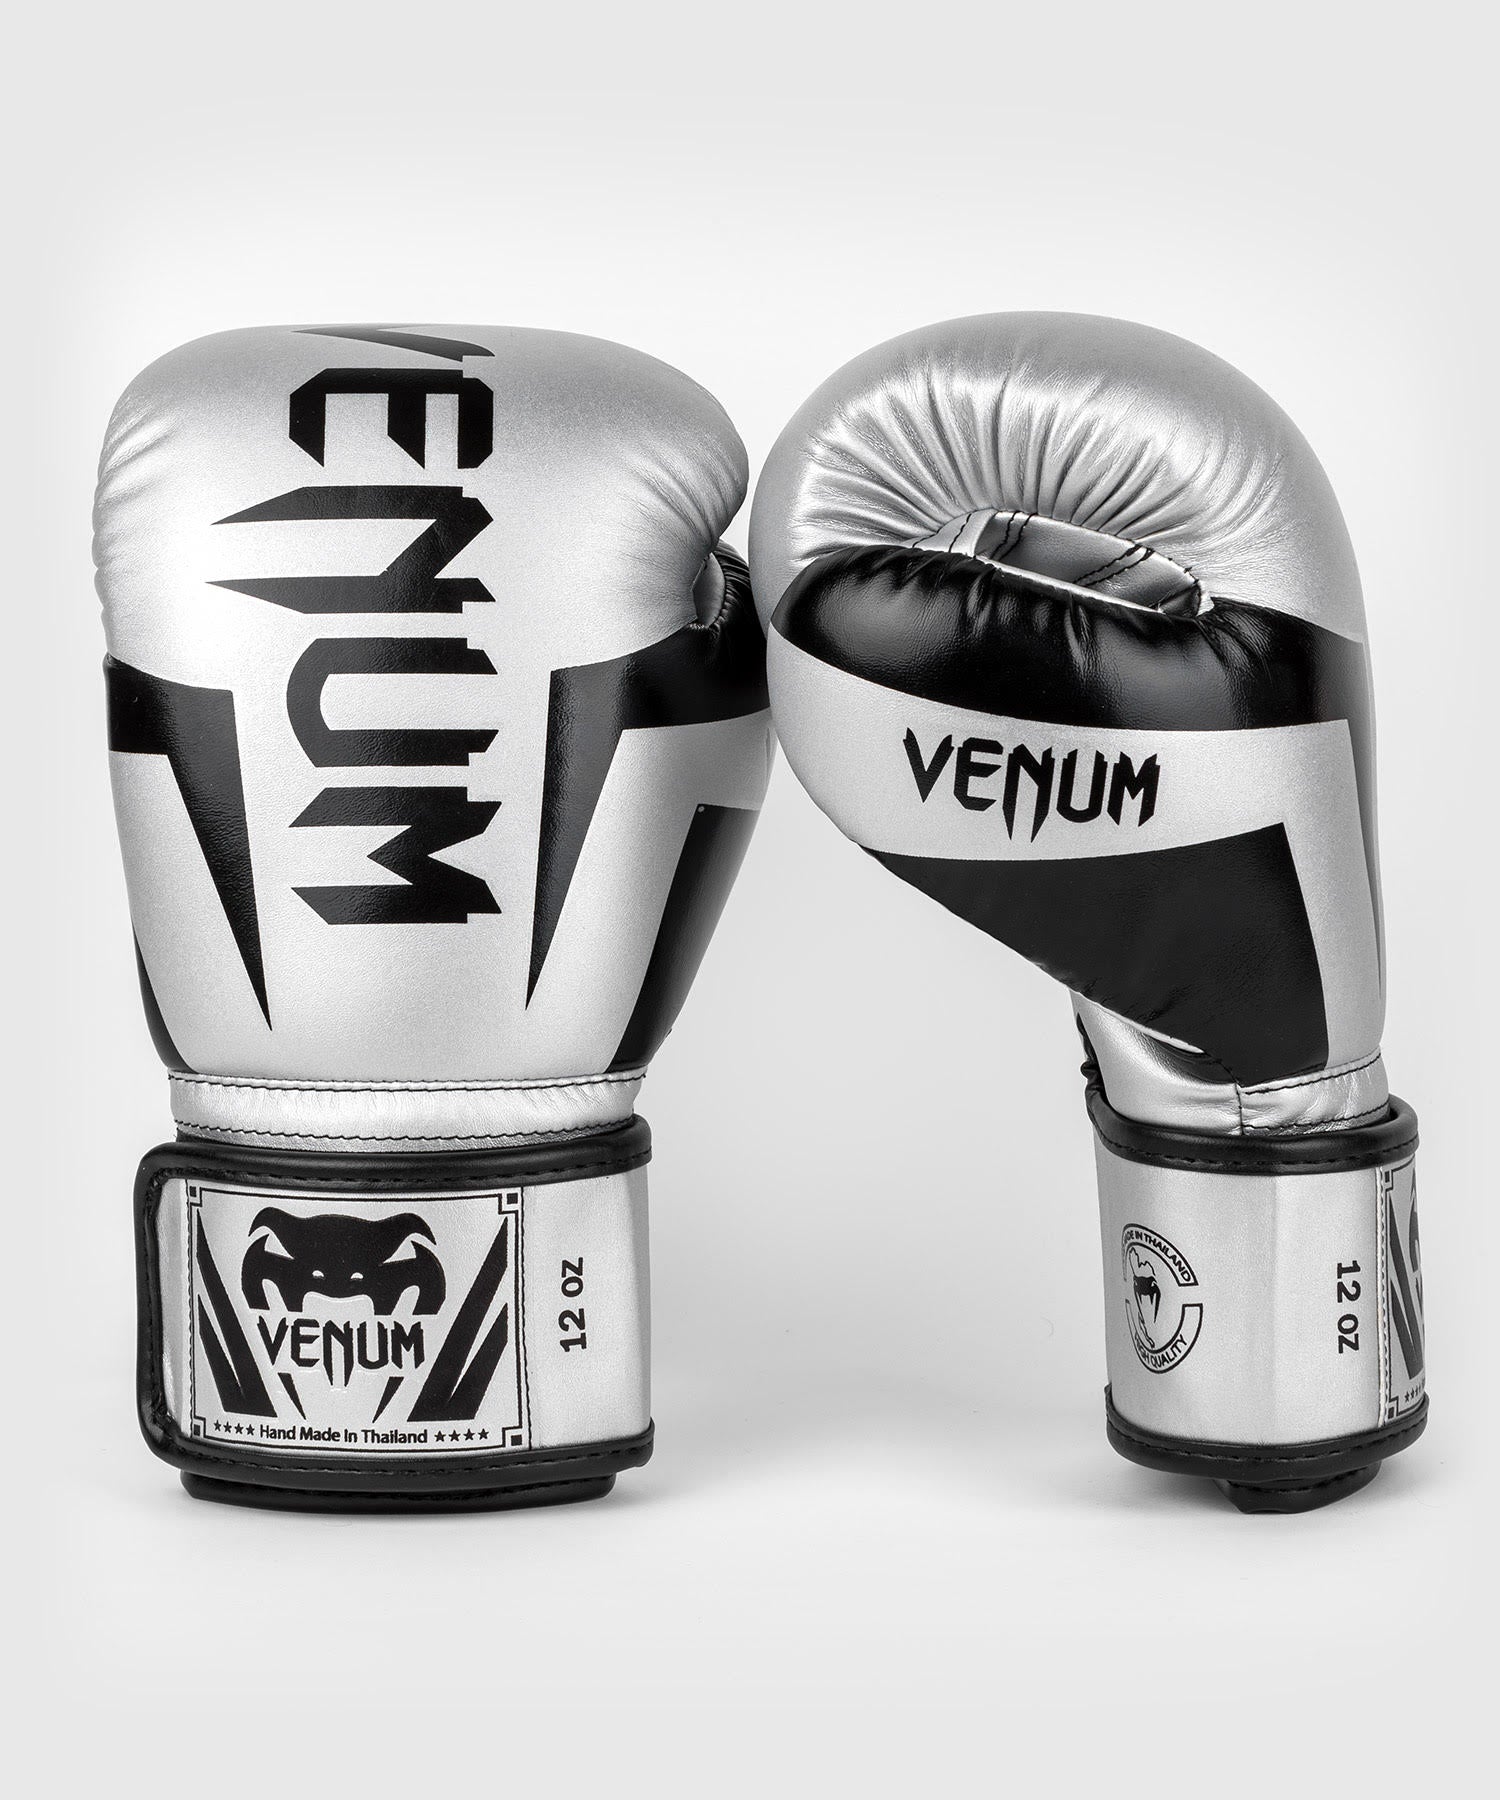 Twins Special Dragon Boxing Gloves Negro-Oro